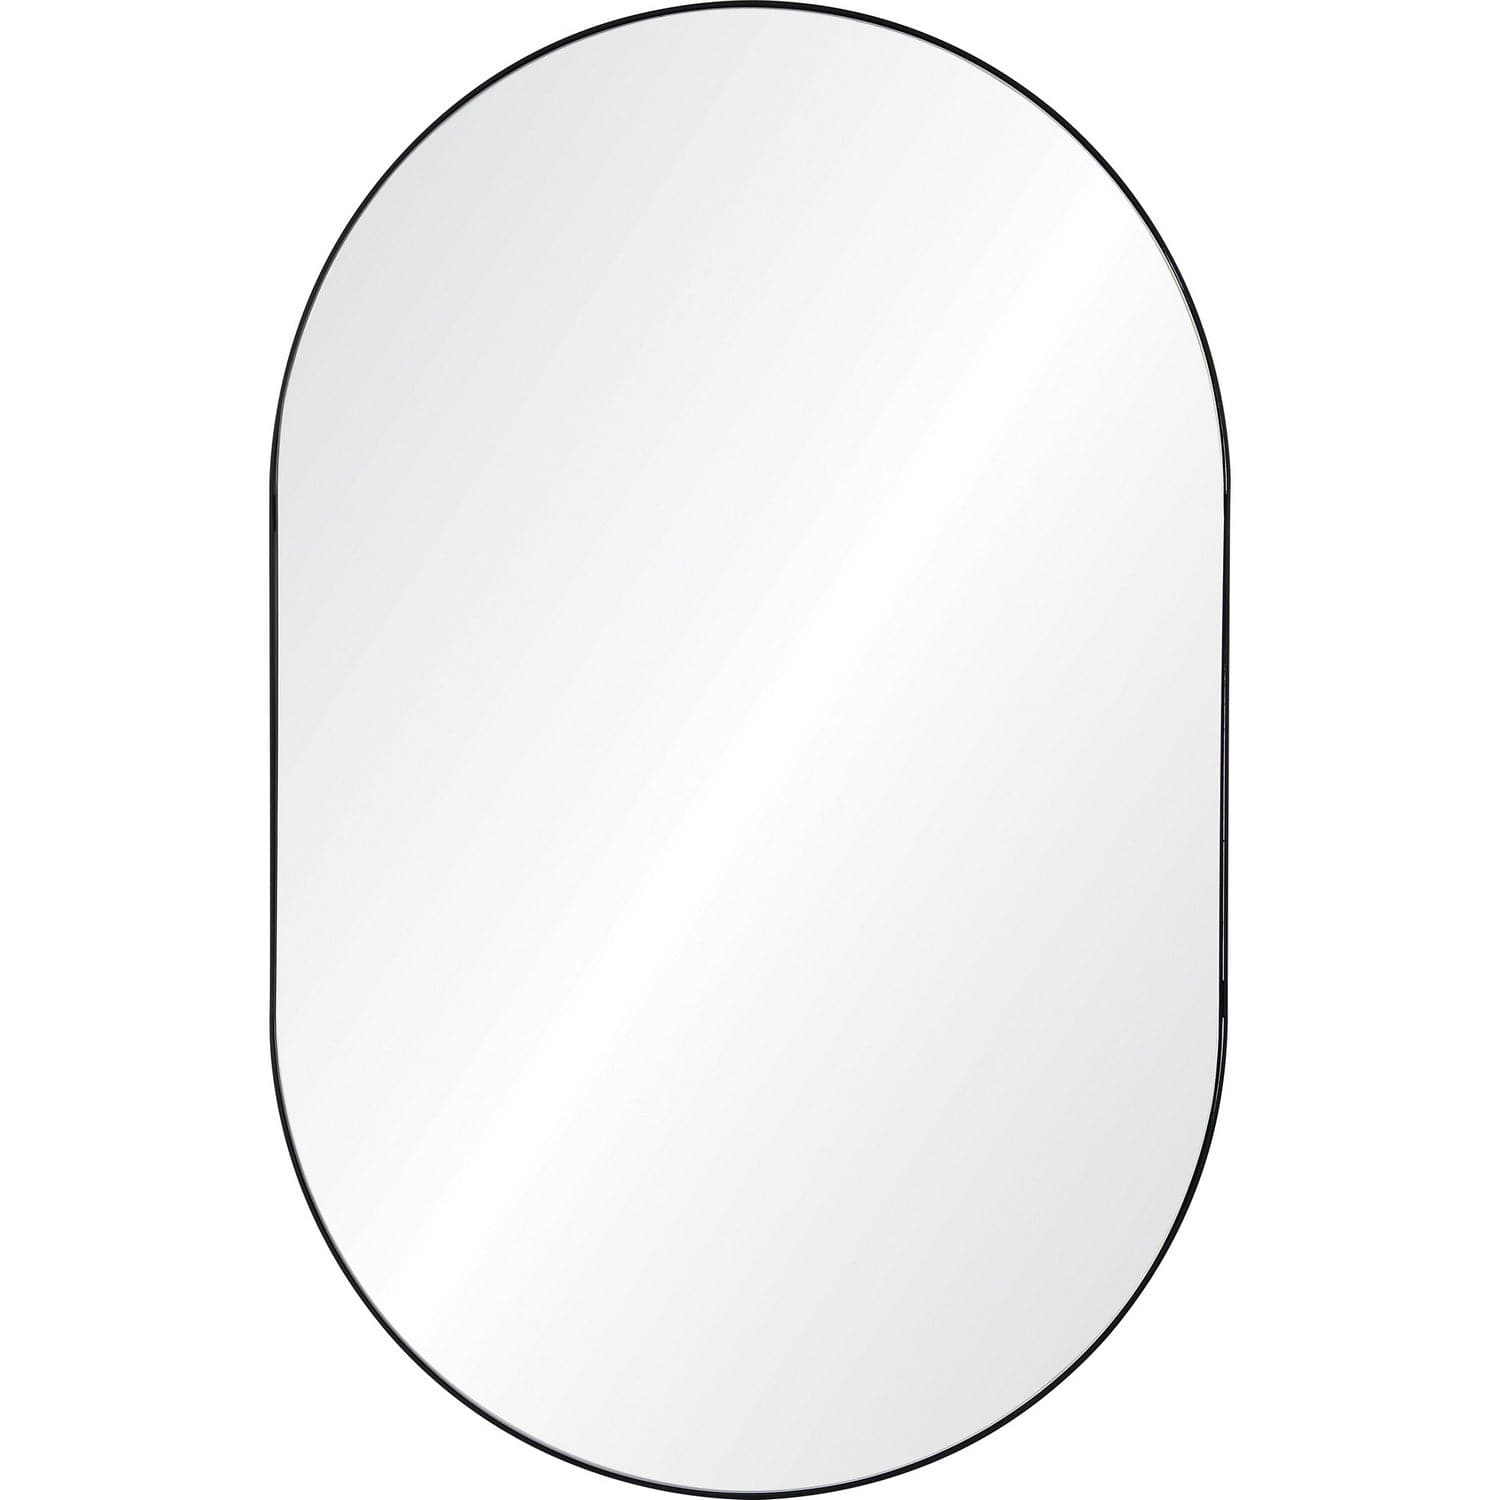 Renwil - MT2394 - Mirrors/Pictures - Mirrors-Oval/Rd.